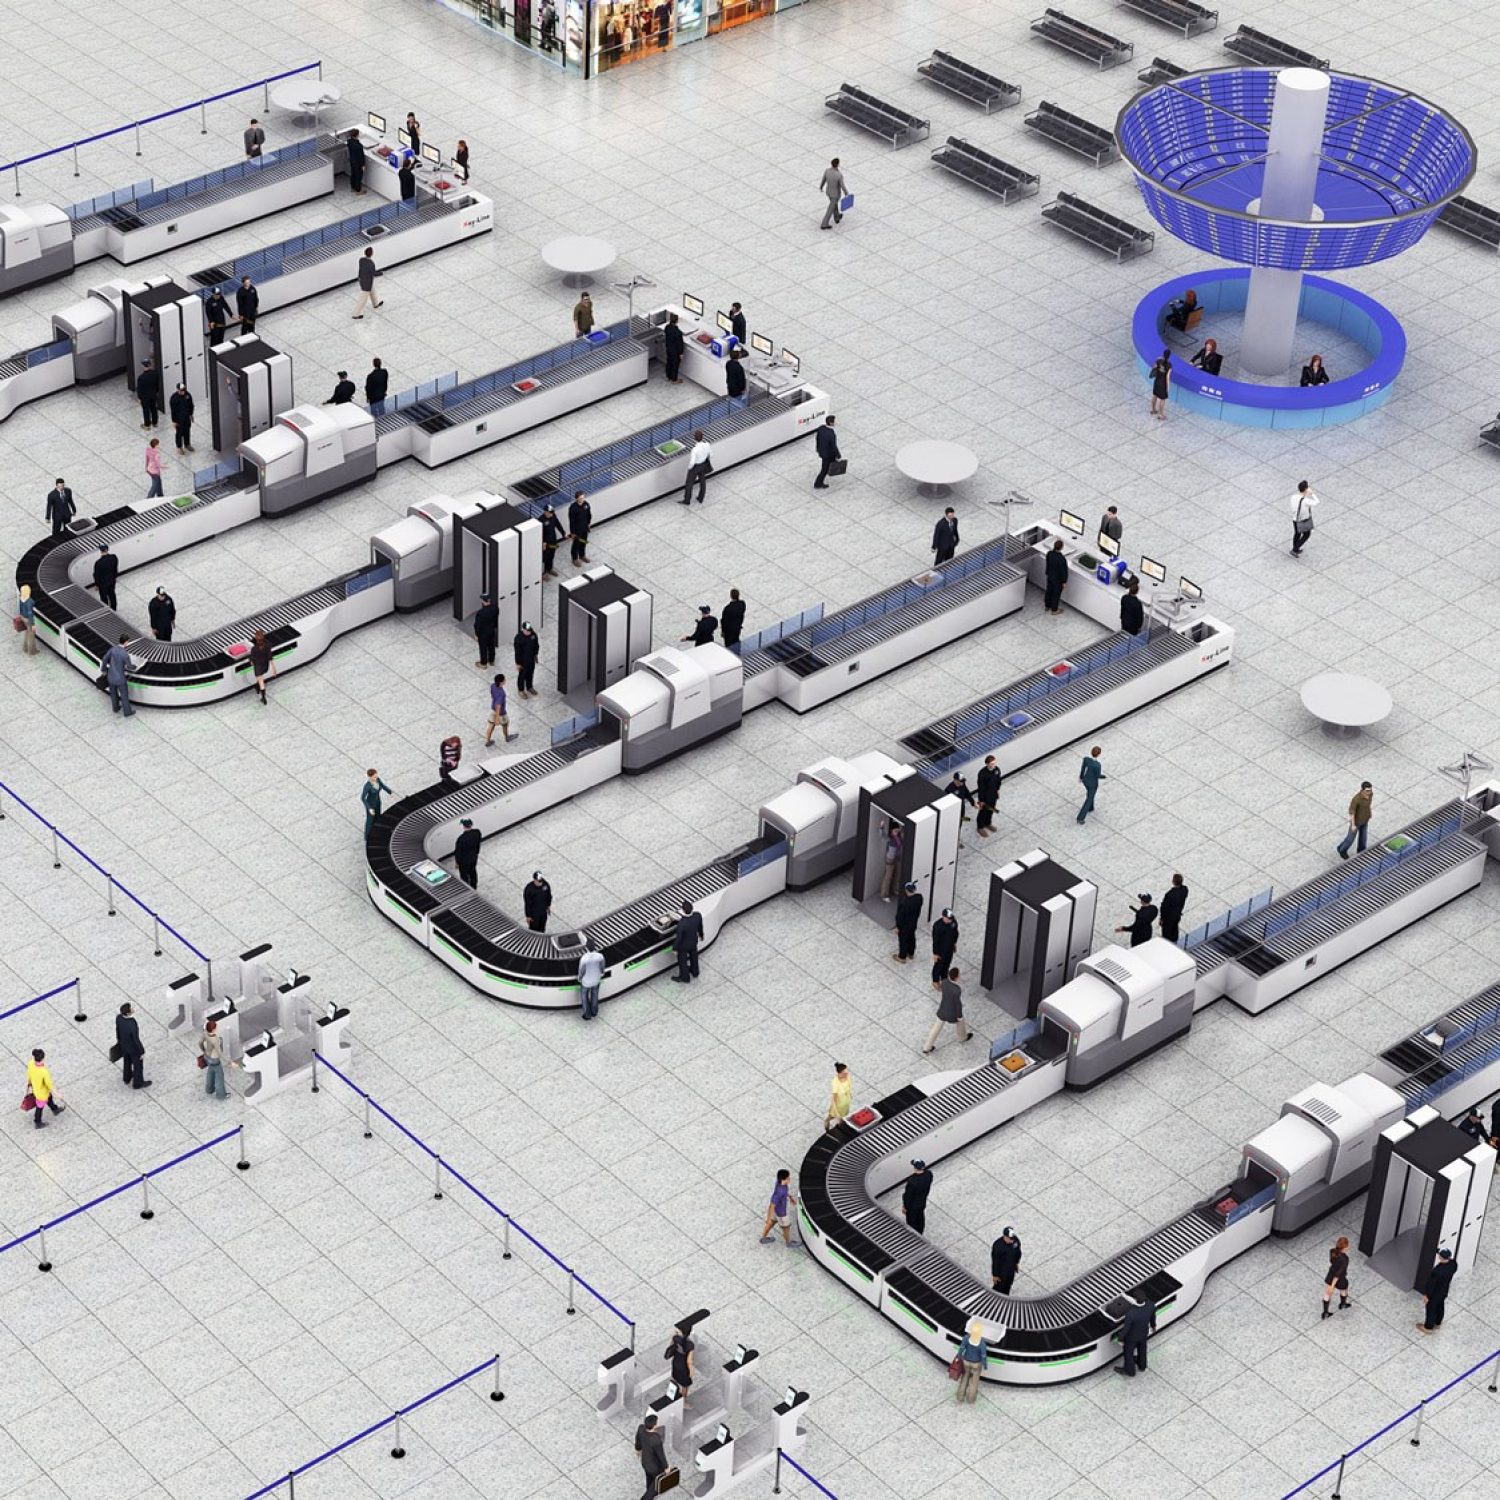 Nuctech airport security scanners | aviation